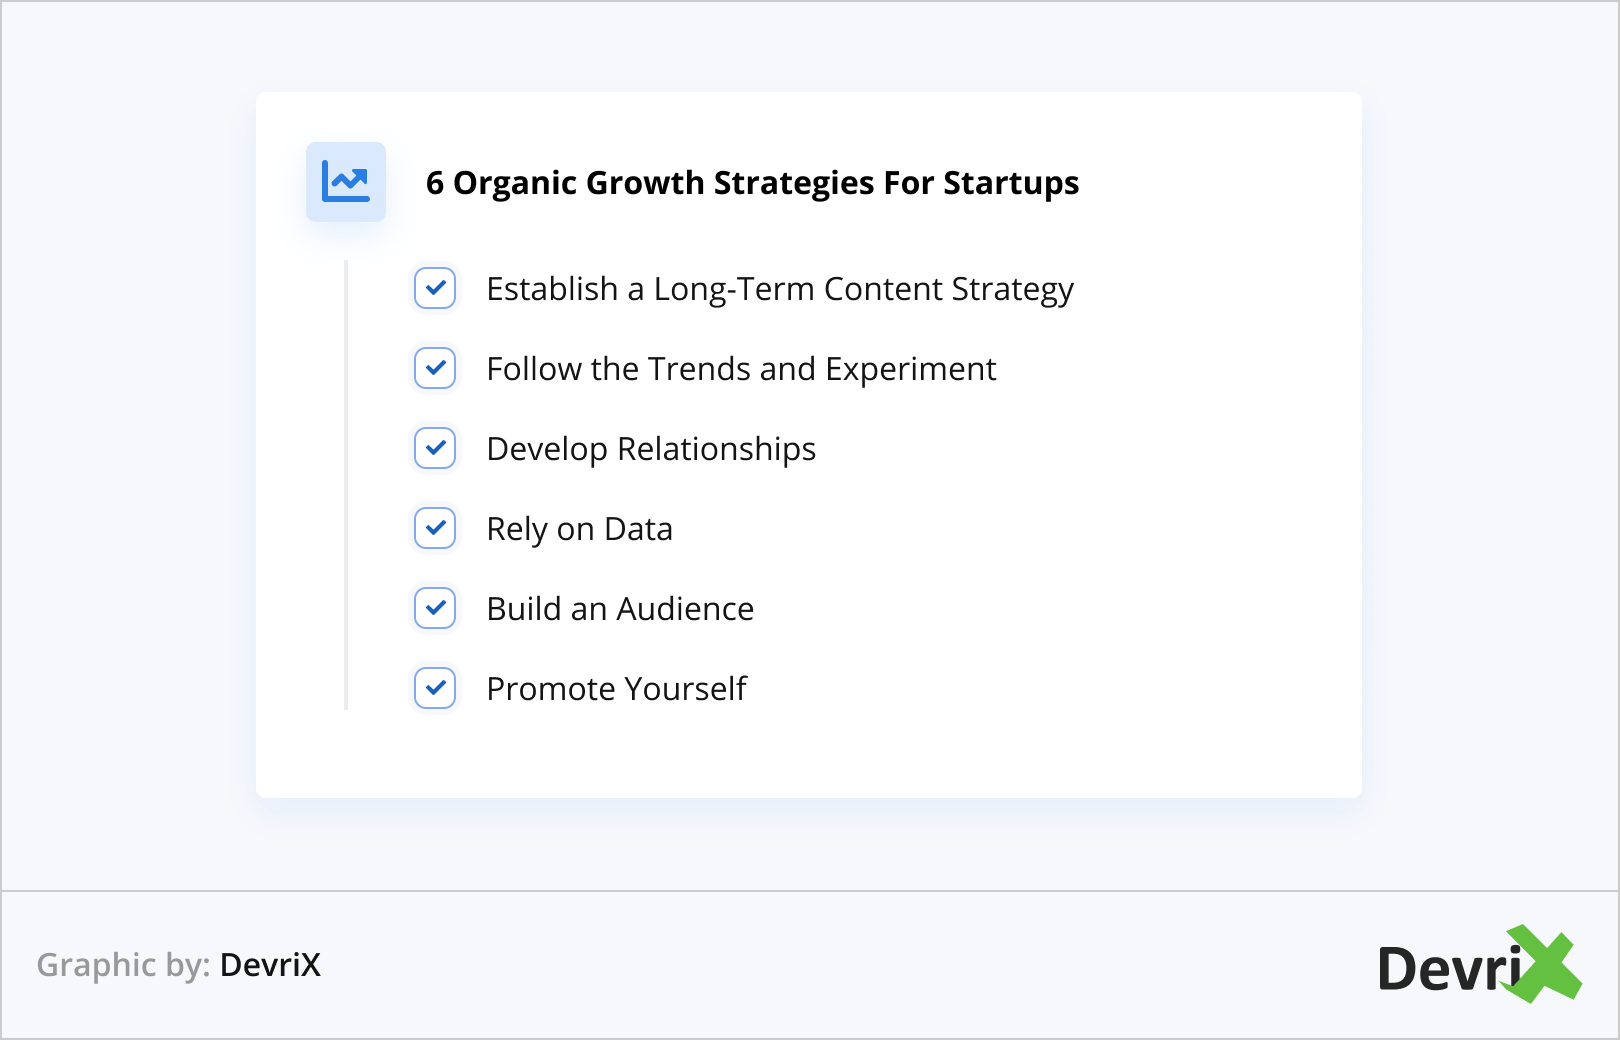 6 Organic Growth Strategies For Startups